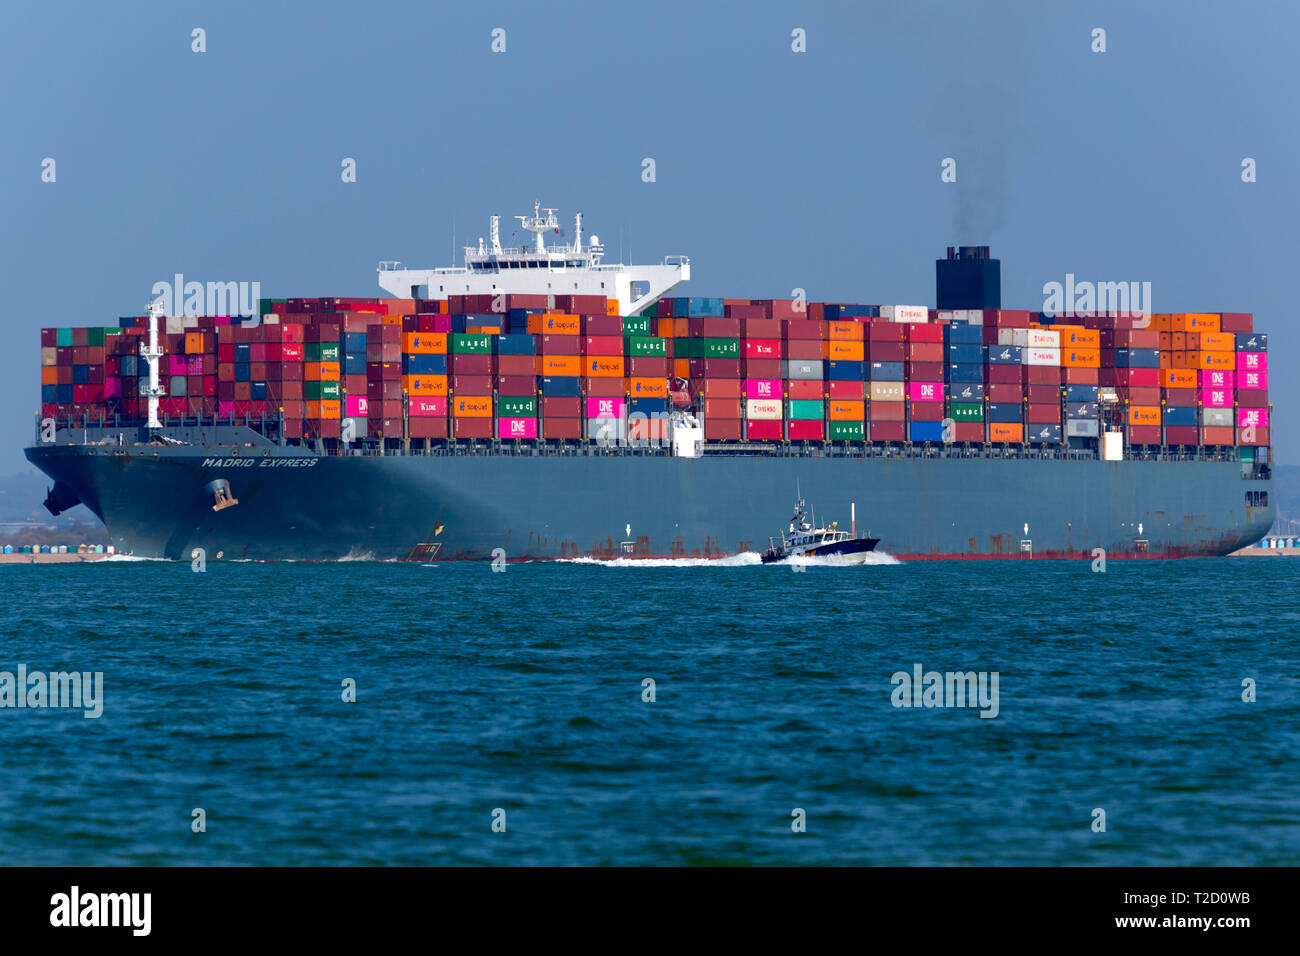 Container,Ship,Madrid,Express,Southampton,Port,Harbour,Escourt,Launch,services,Master,departure,water,The Solent,Cowes,Isle of Wight,UK, Stock Photo